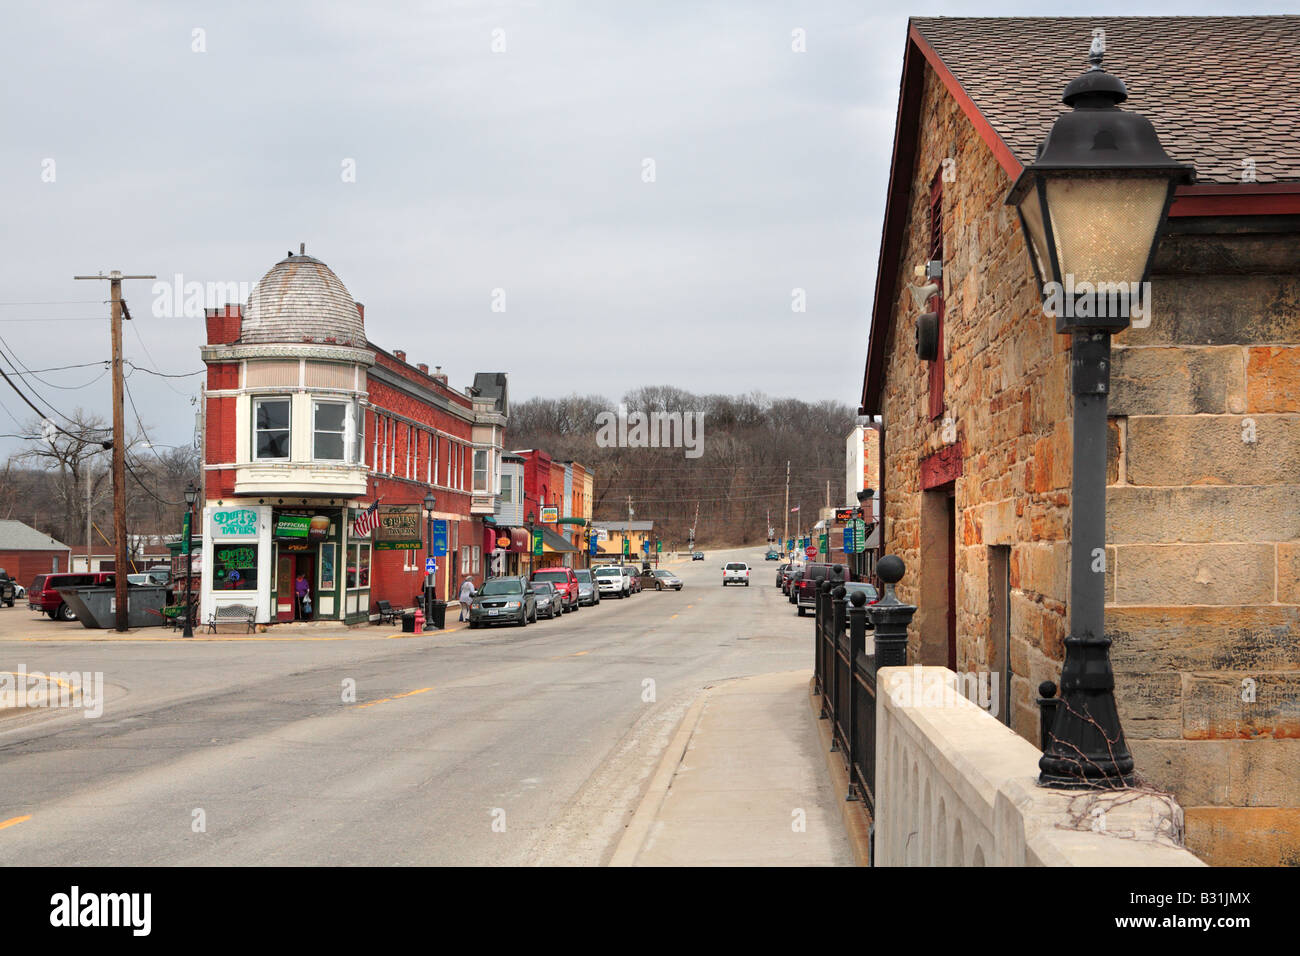 MAIN STREET IN UTICA ILLINOIS USA A SMALL MIDWESTERN TOWN LOCATED ON THE HISTORIC ILLINOIS MICHIGAN CANAL AND NEAR STARVED ROCK Stock Photo